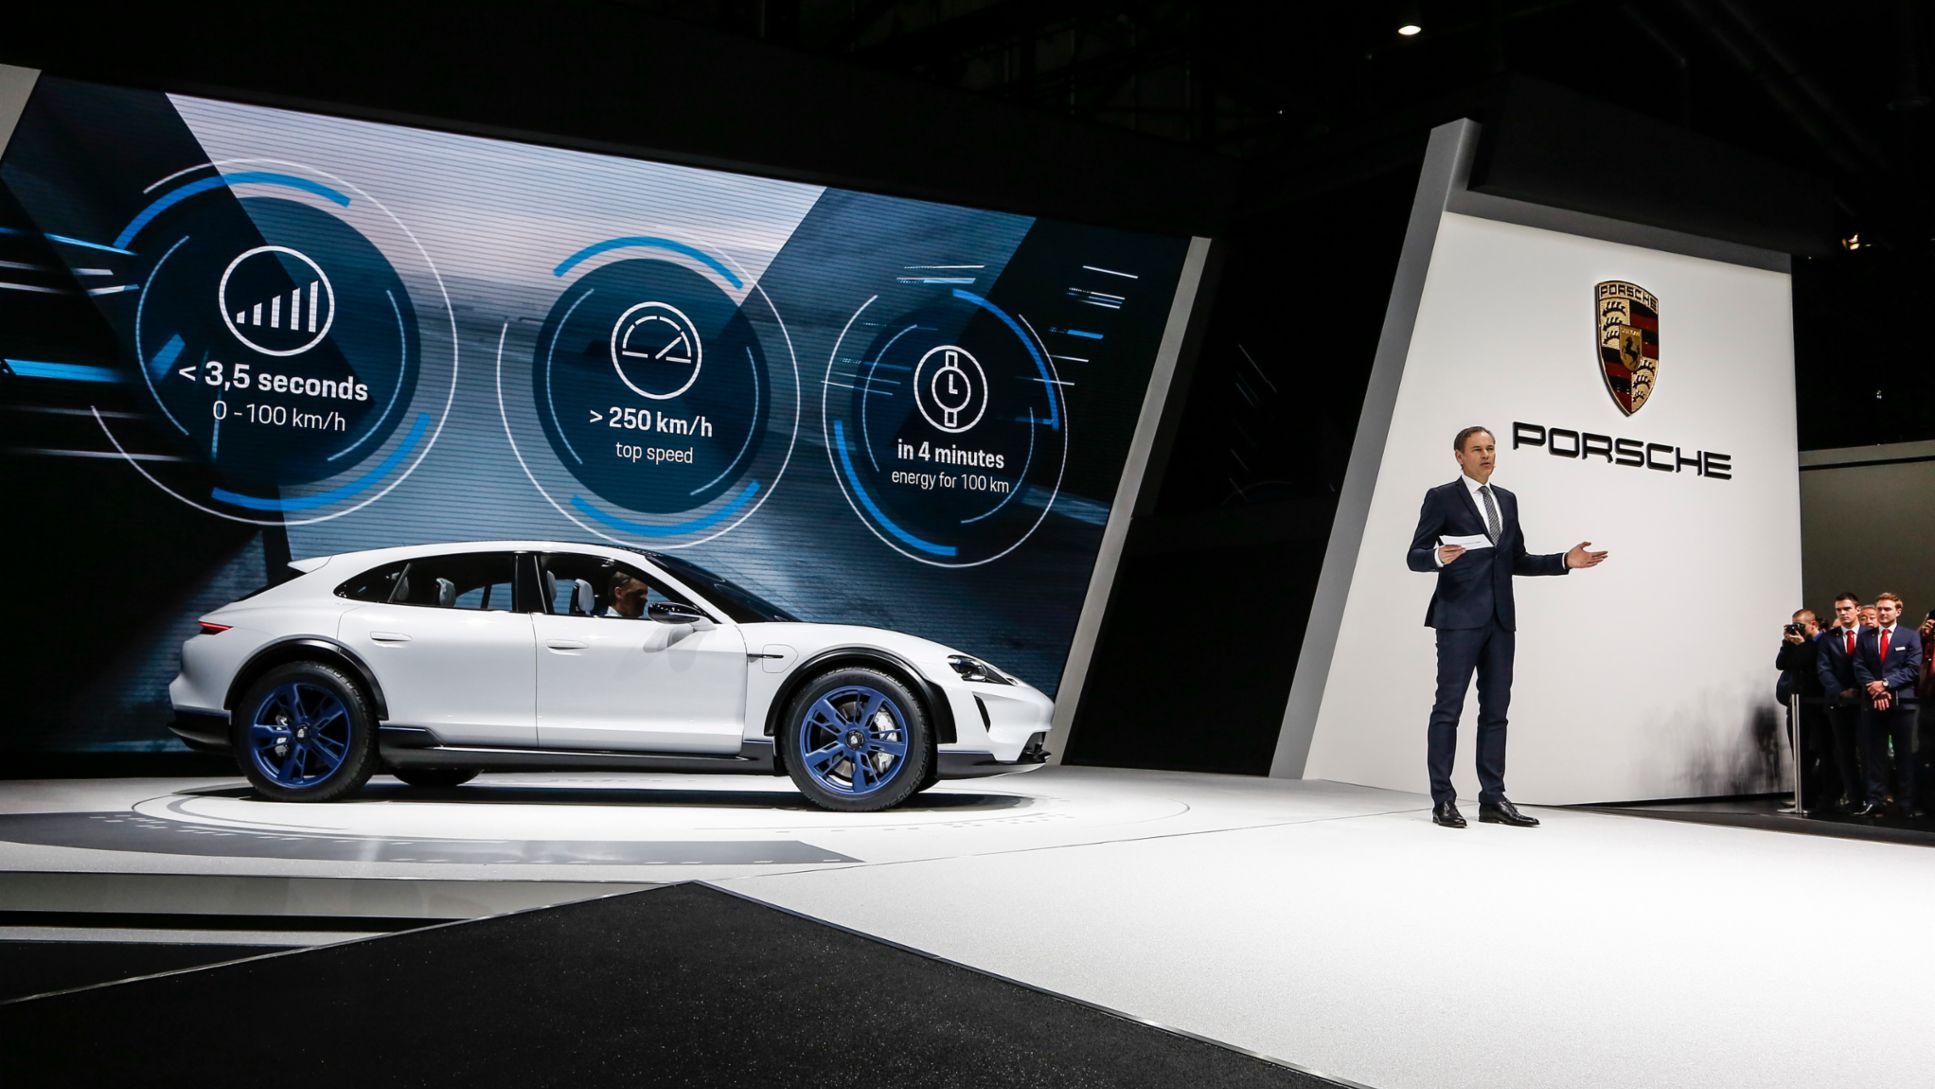 Geneva International Motor Show 2018: Oliver Blume, Chairman of the Executive Board of Porsche AG, presenting the concept study Mission E Cross Turismo